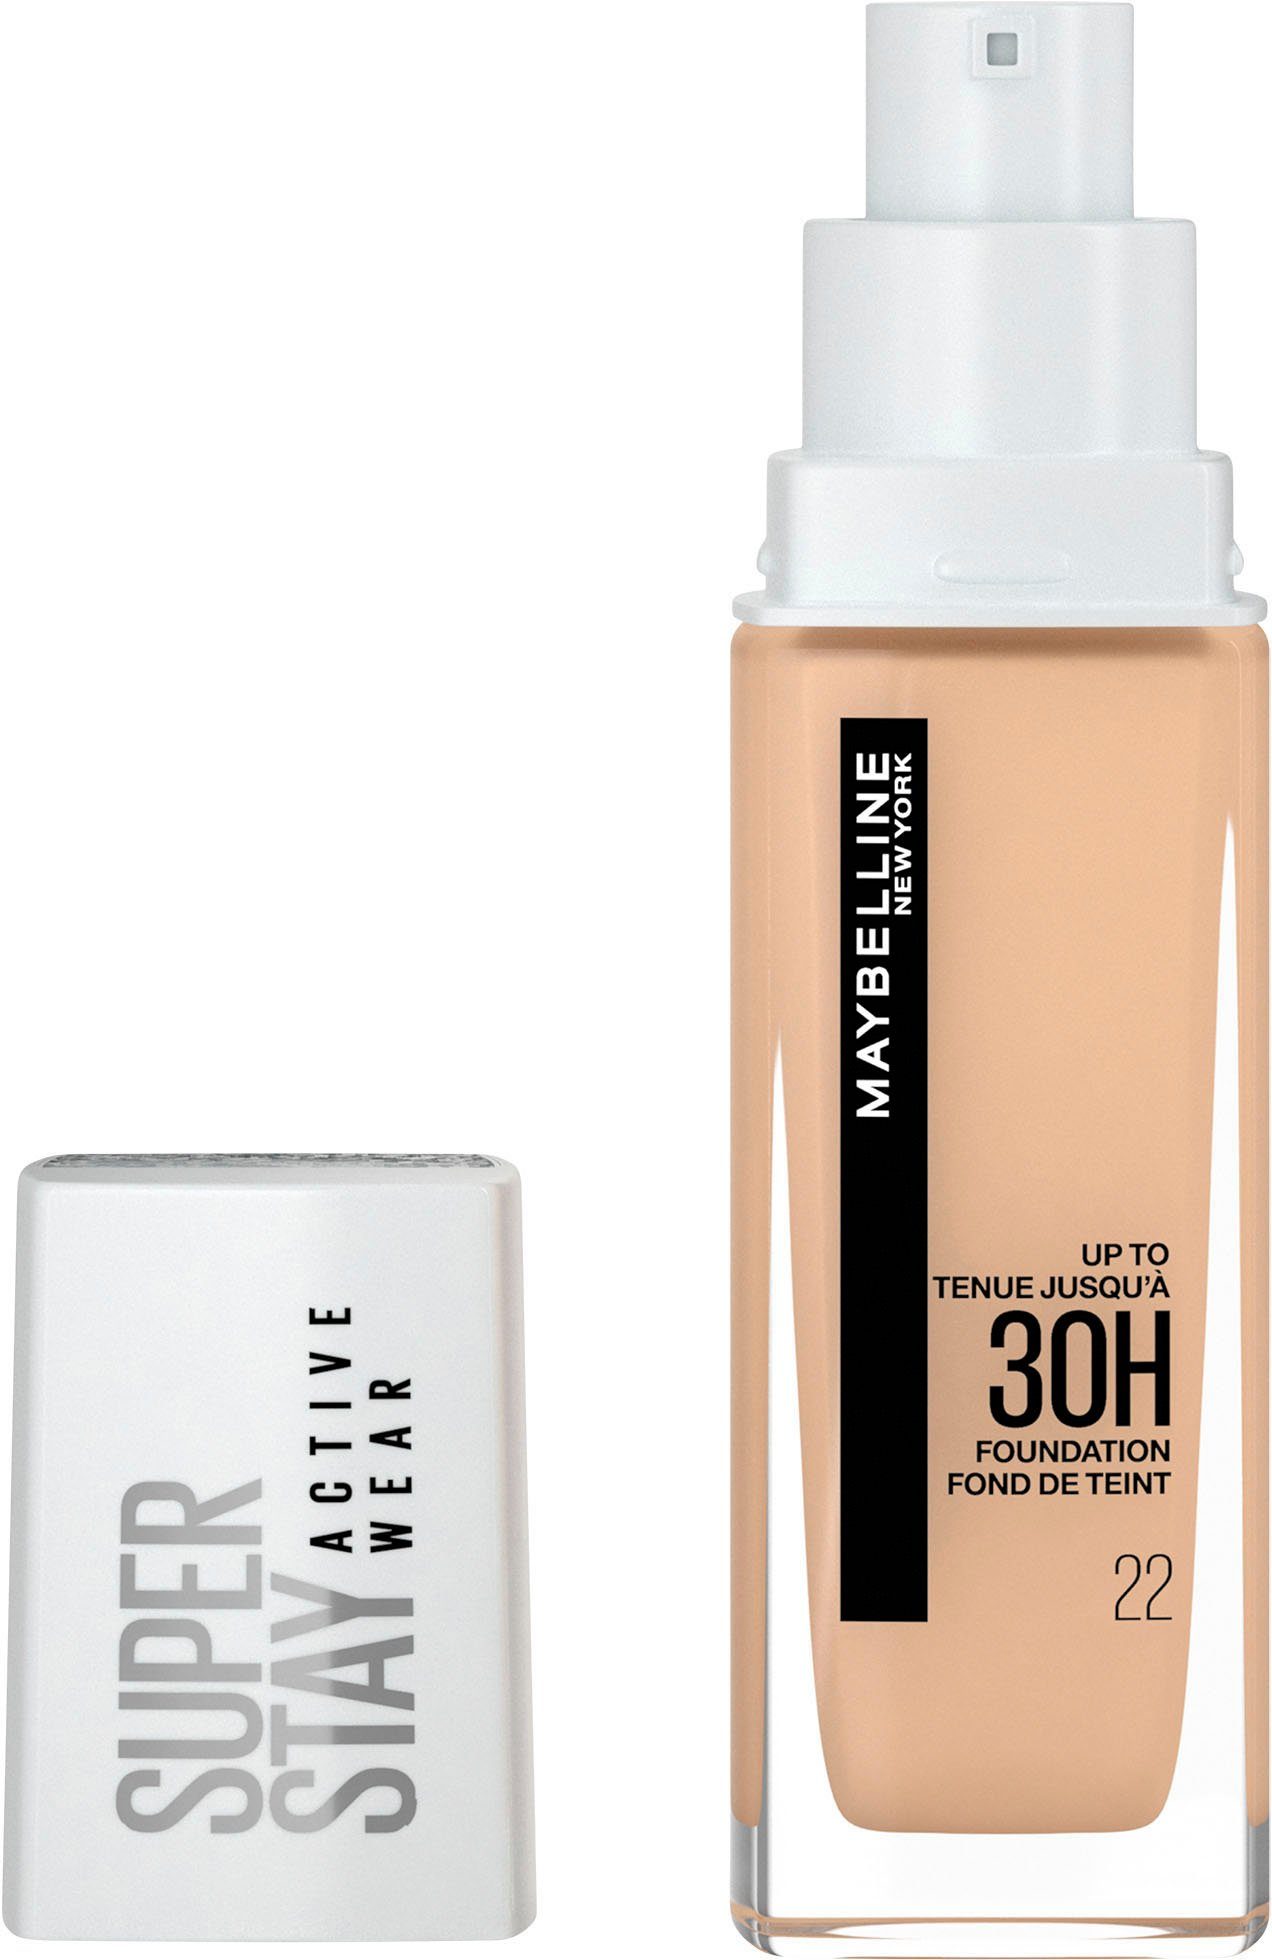 Super Active Bisque NEW 22 Stay Light YORK Wear MAYBELLINE Foundation